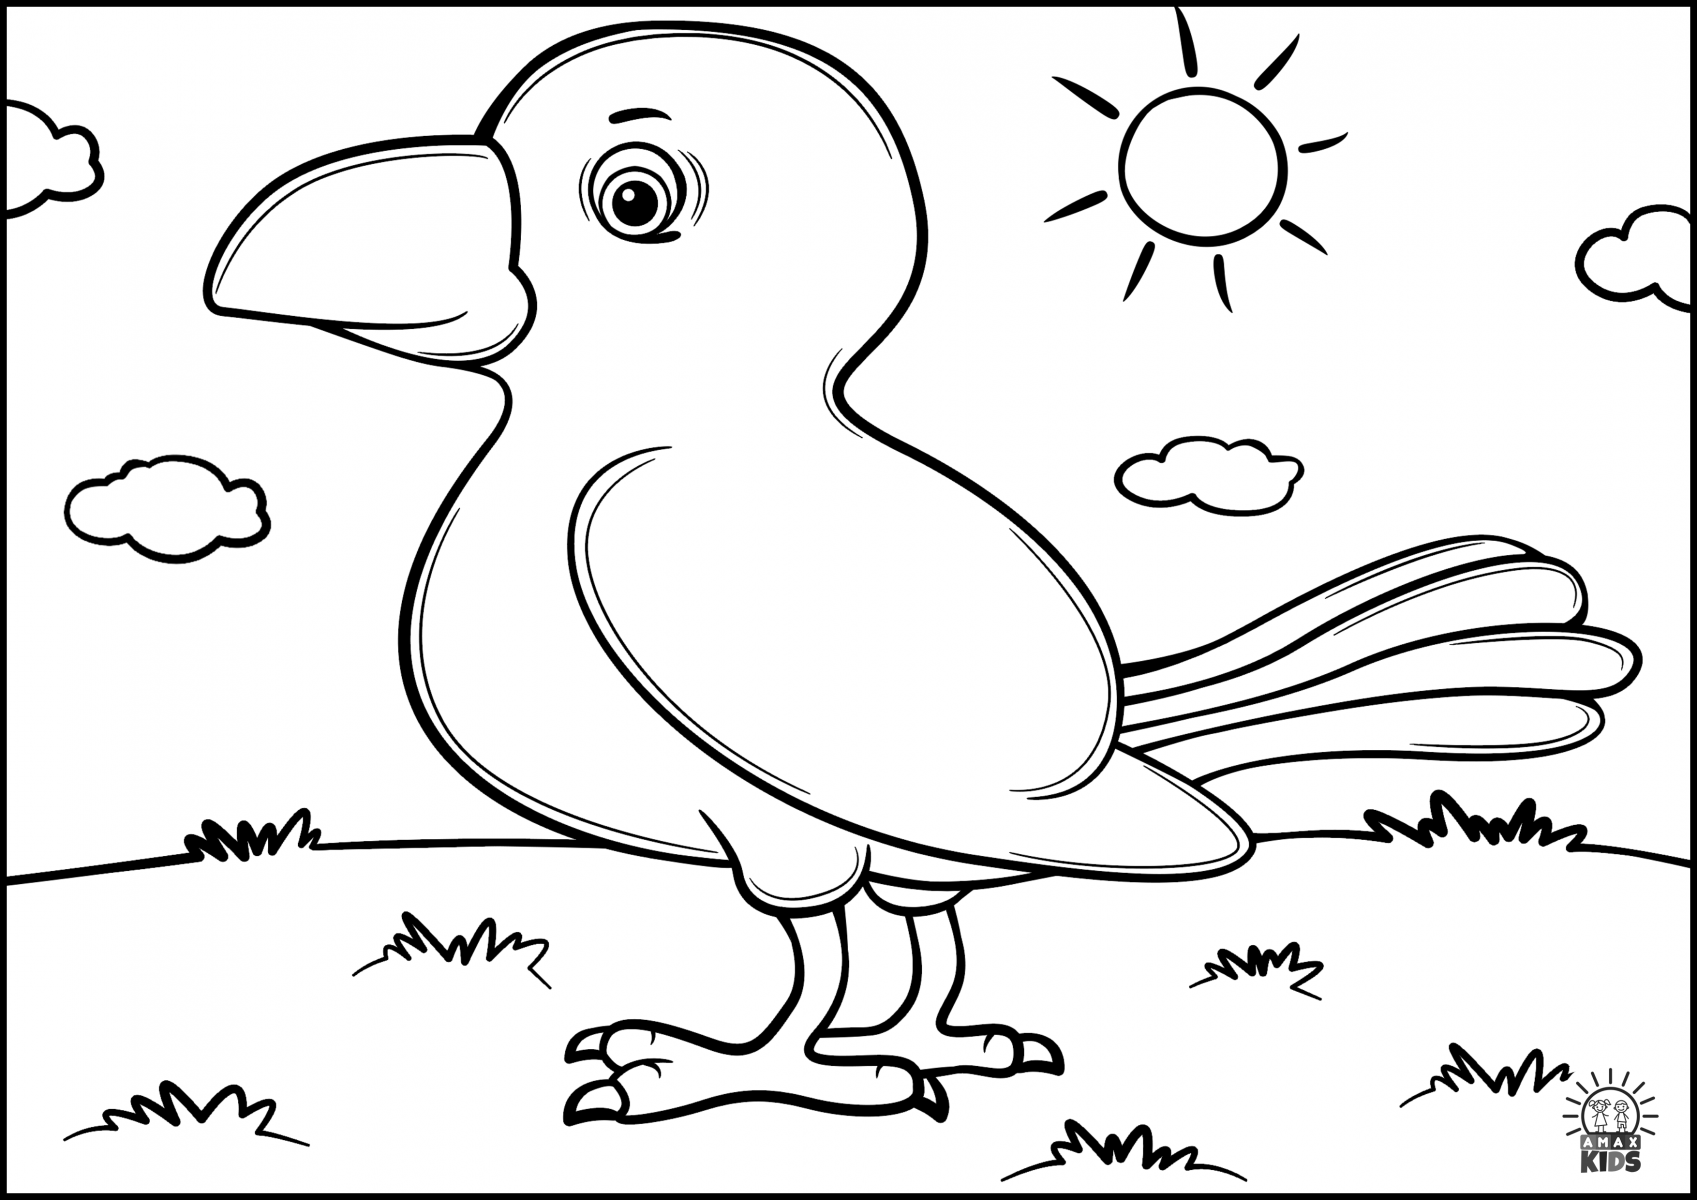 Download Coloring pages for kids with birds | Amax Kids